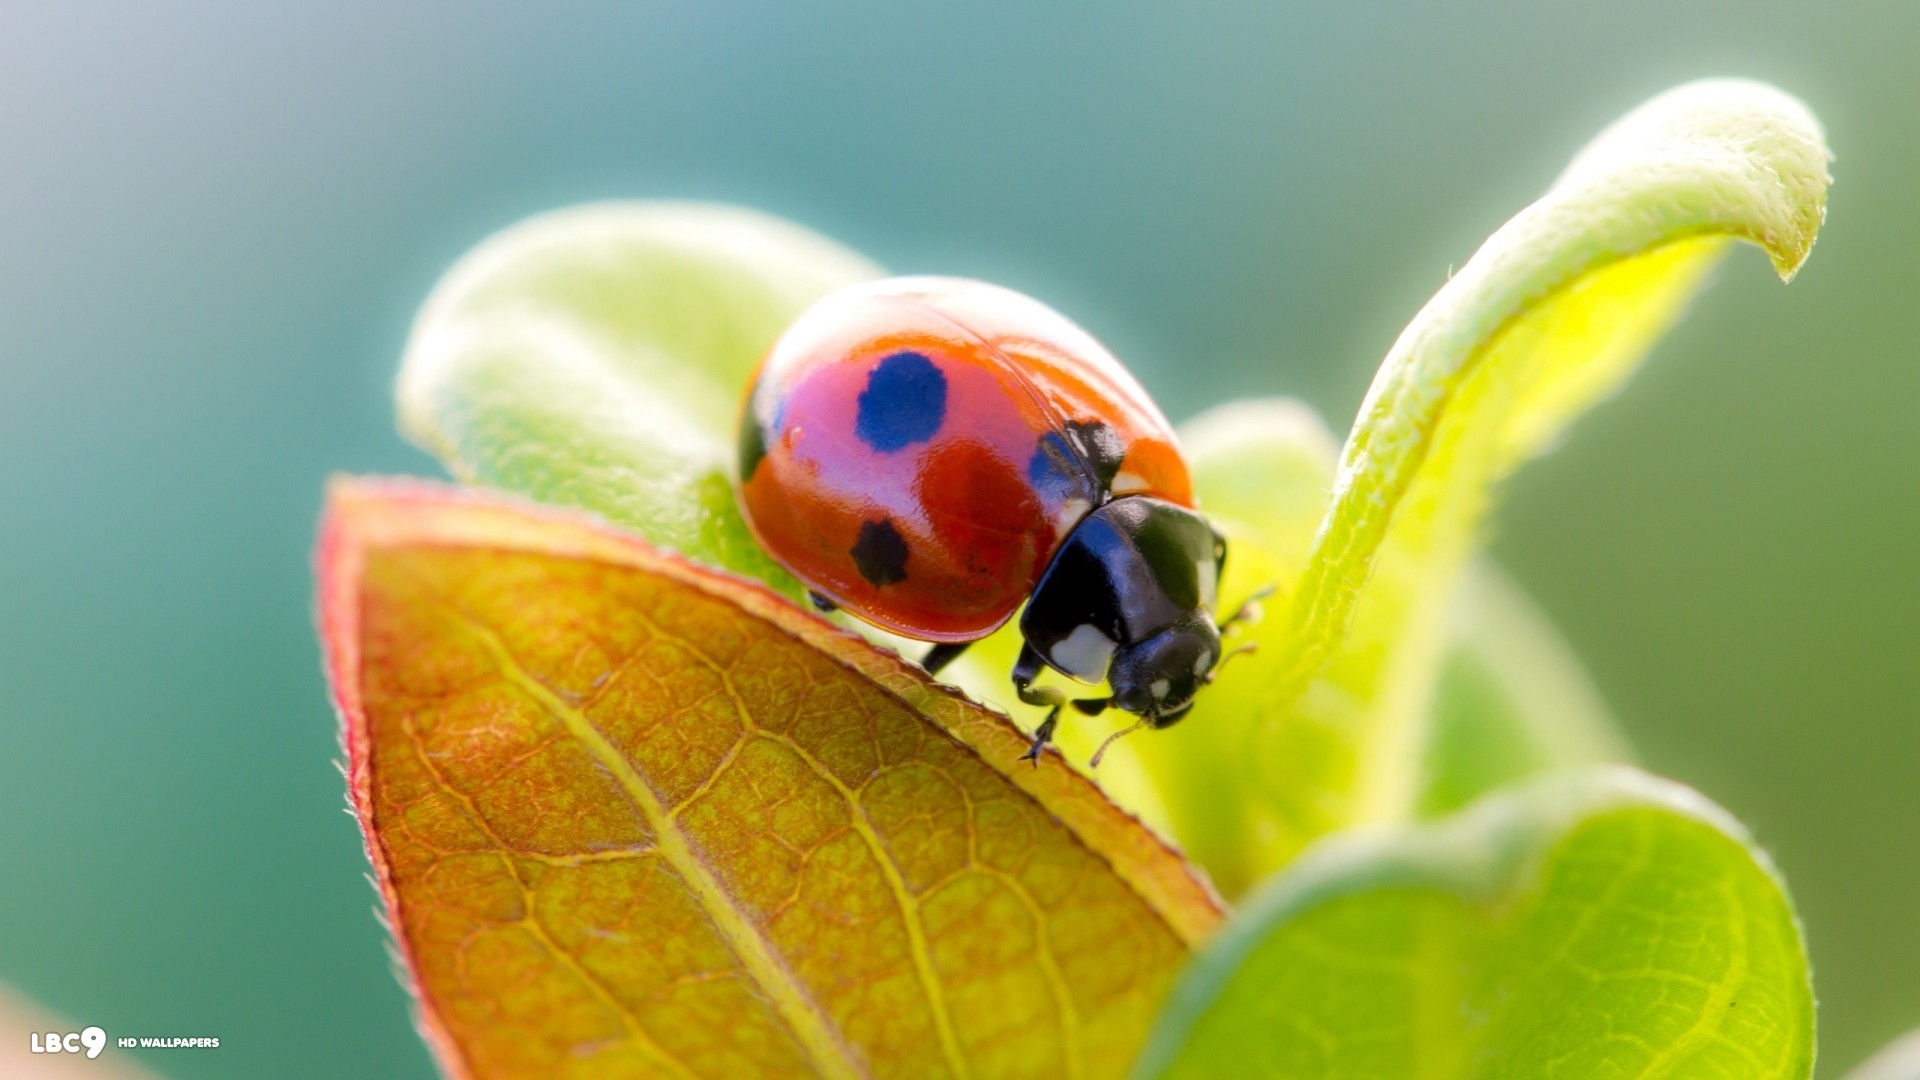 The Most Beautiful Ladybird Beetle Wallpaper - Hd Screen Saver For Pc , HD Wallpaper & Backgrounds